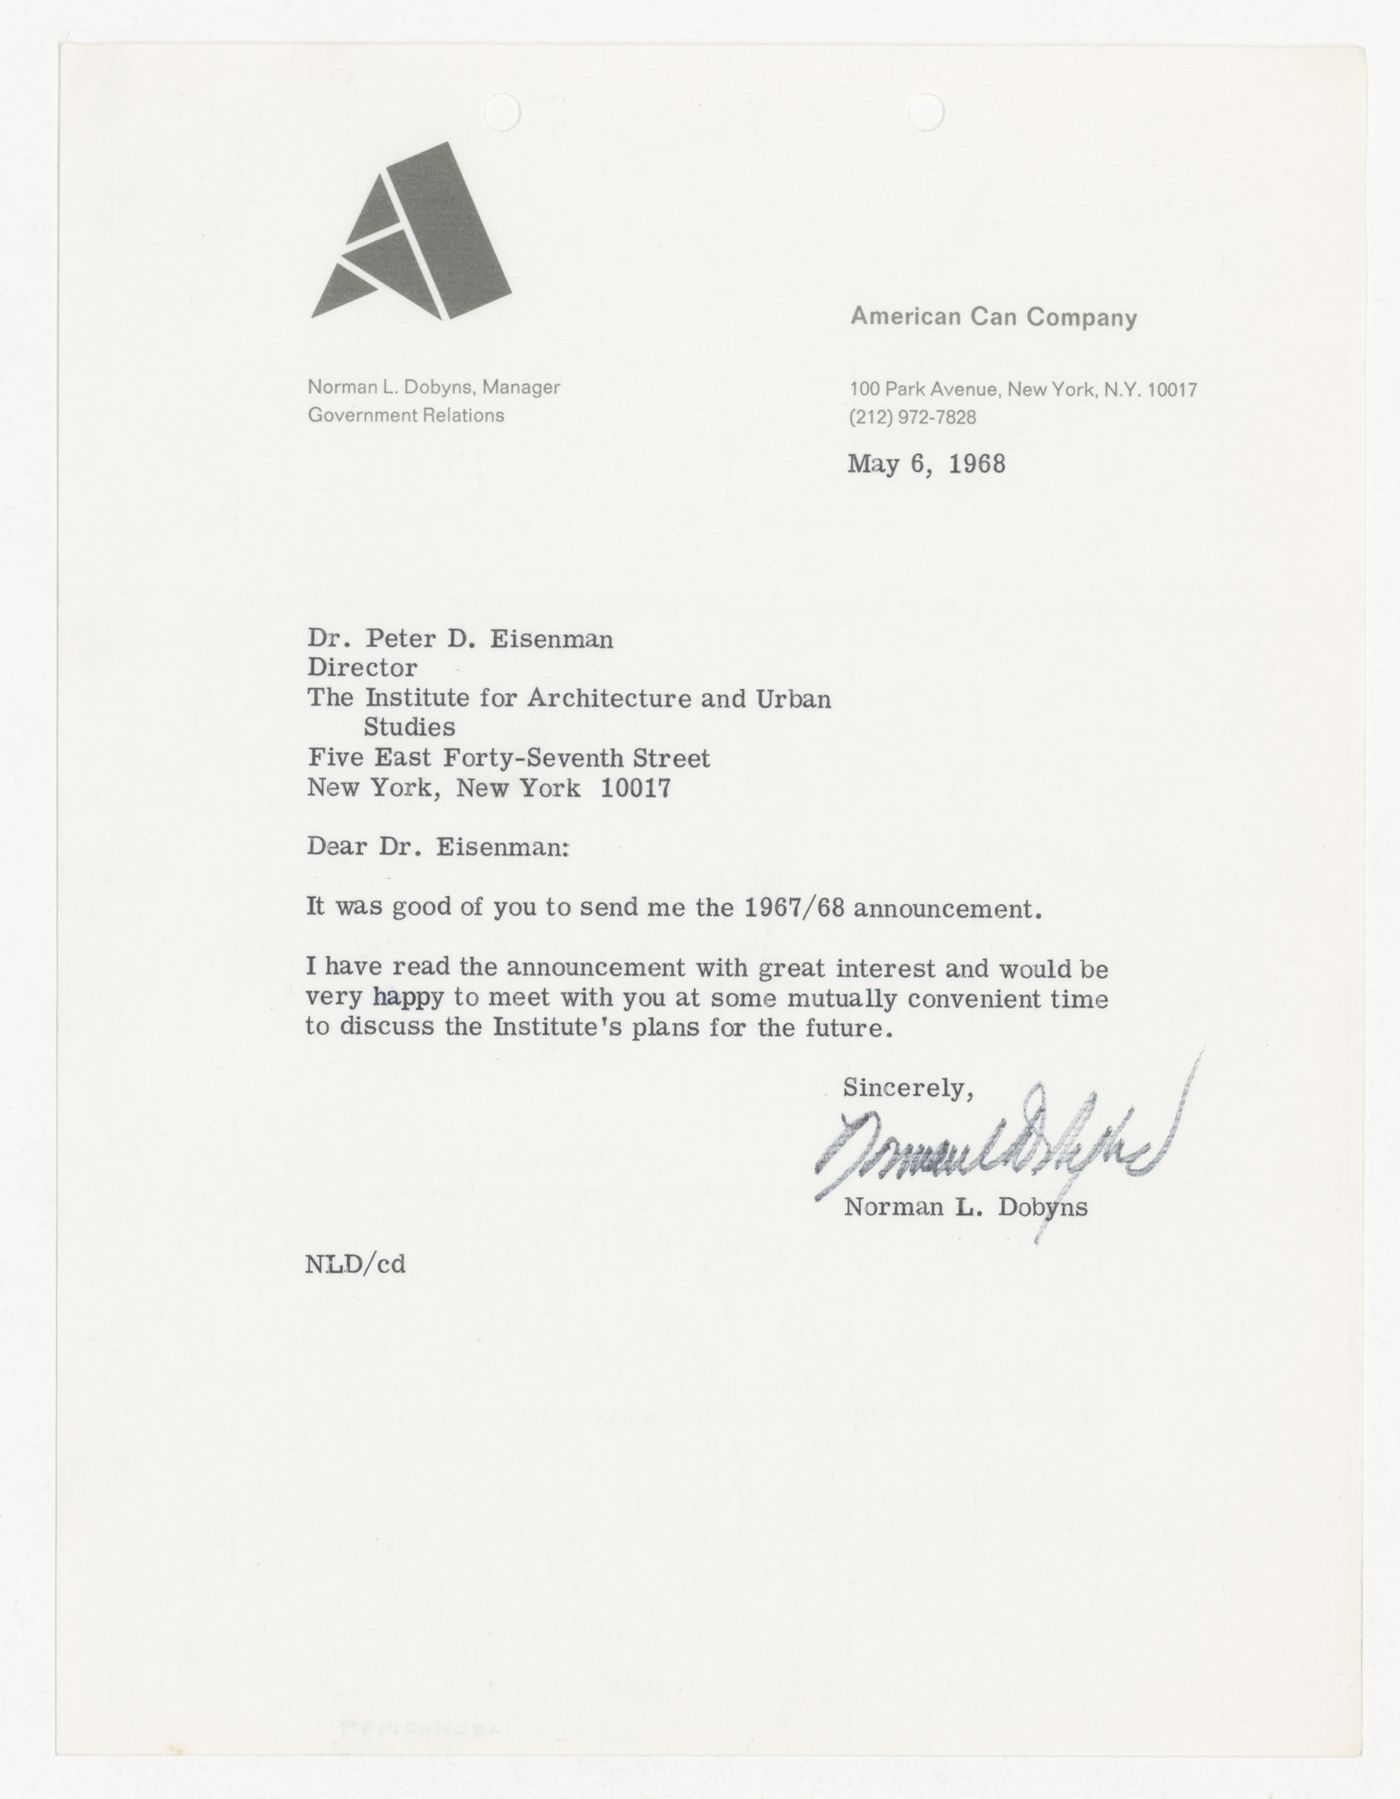 Letter from Norman L. Dobyns to Peter D. Eisenman about IAUS program announcement